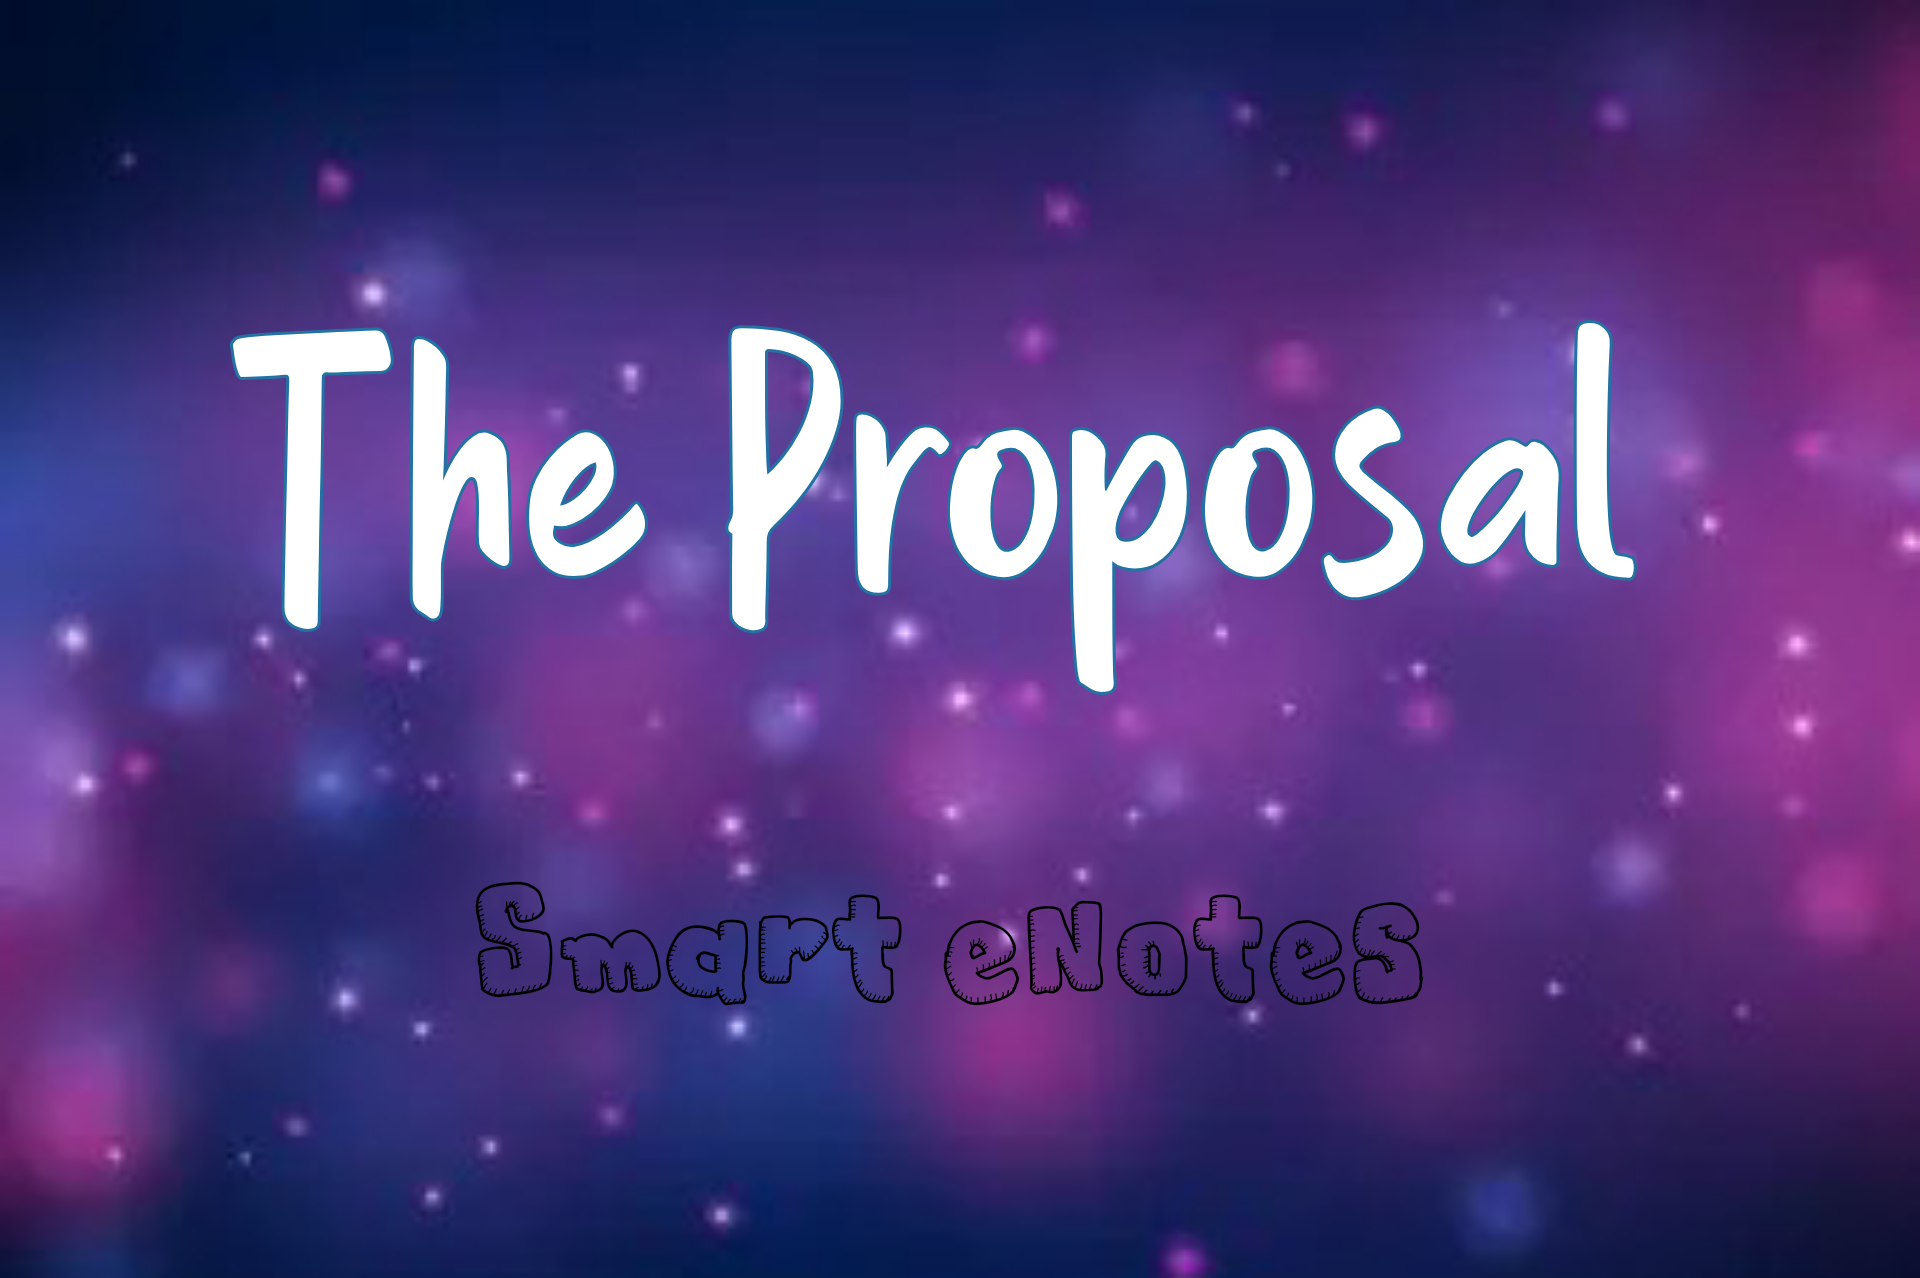 The Proposal by Anton Chekhov - Summary, Characters and Questions Answers | Class 10 Tulip English 1